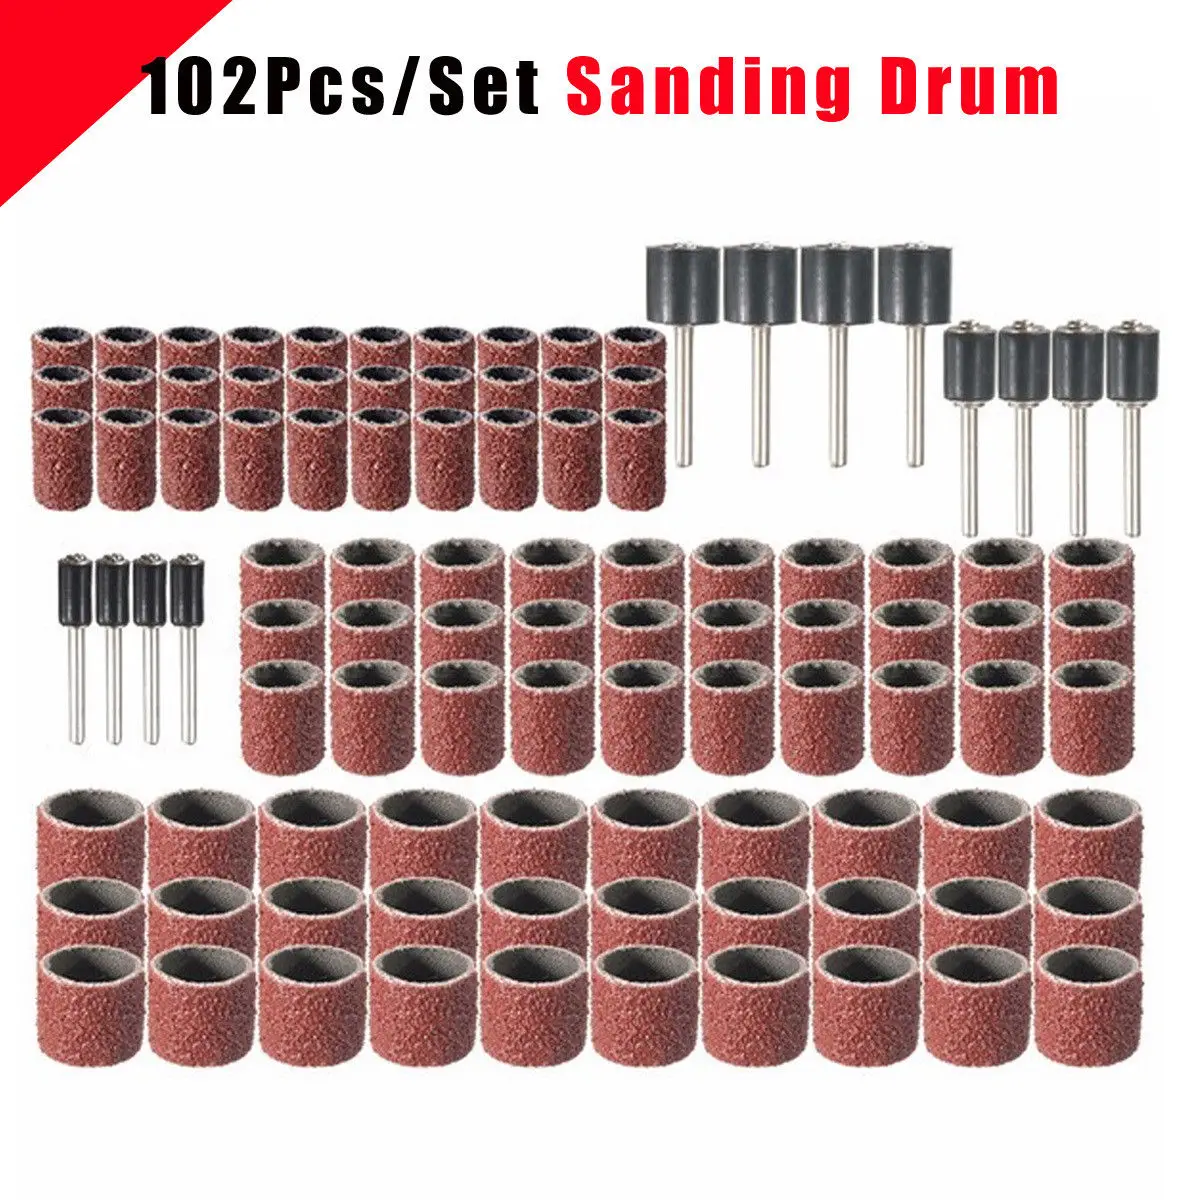 150 Grit Sand Bands Shank Rotary Tool Kit with 5Pcs Mandrels 50Pcs Sanding Drum 1//2 inch